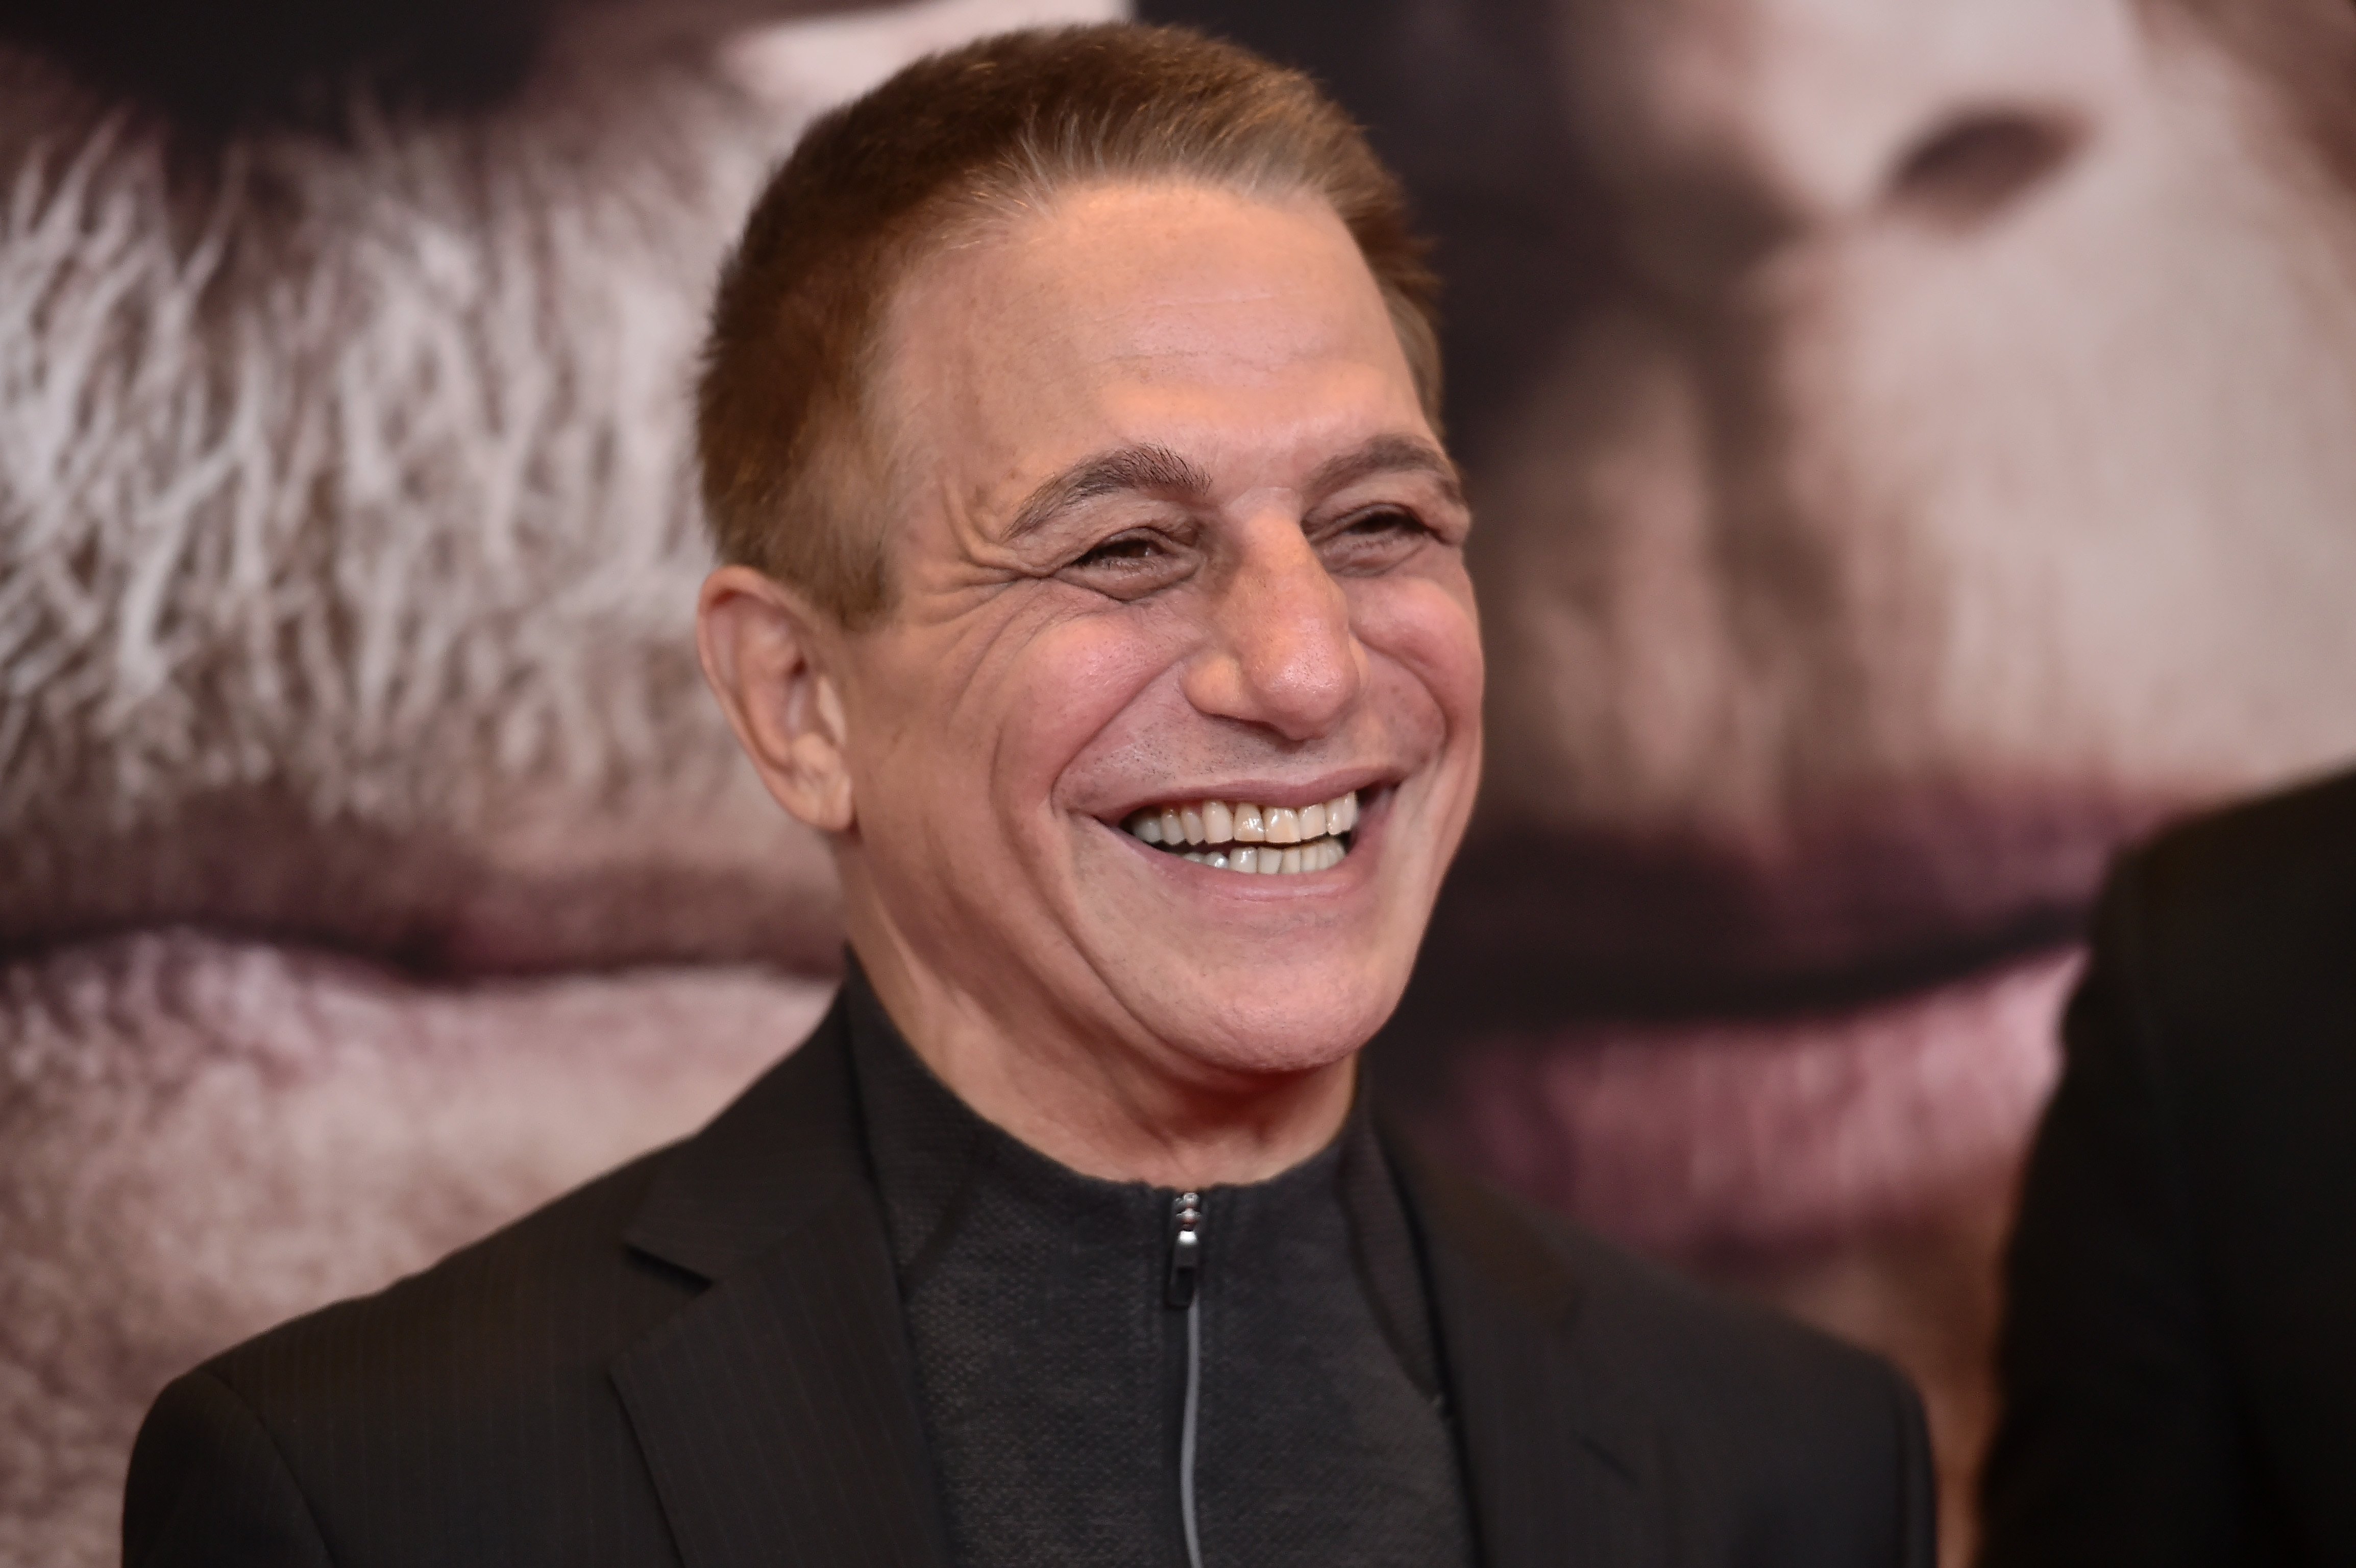 Tony Danza will soon reprise his role as Tony Micelli for the new sequel "Who's the Boss?" | Photo: Getty Images